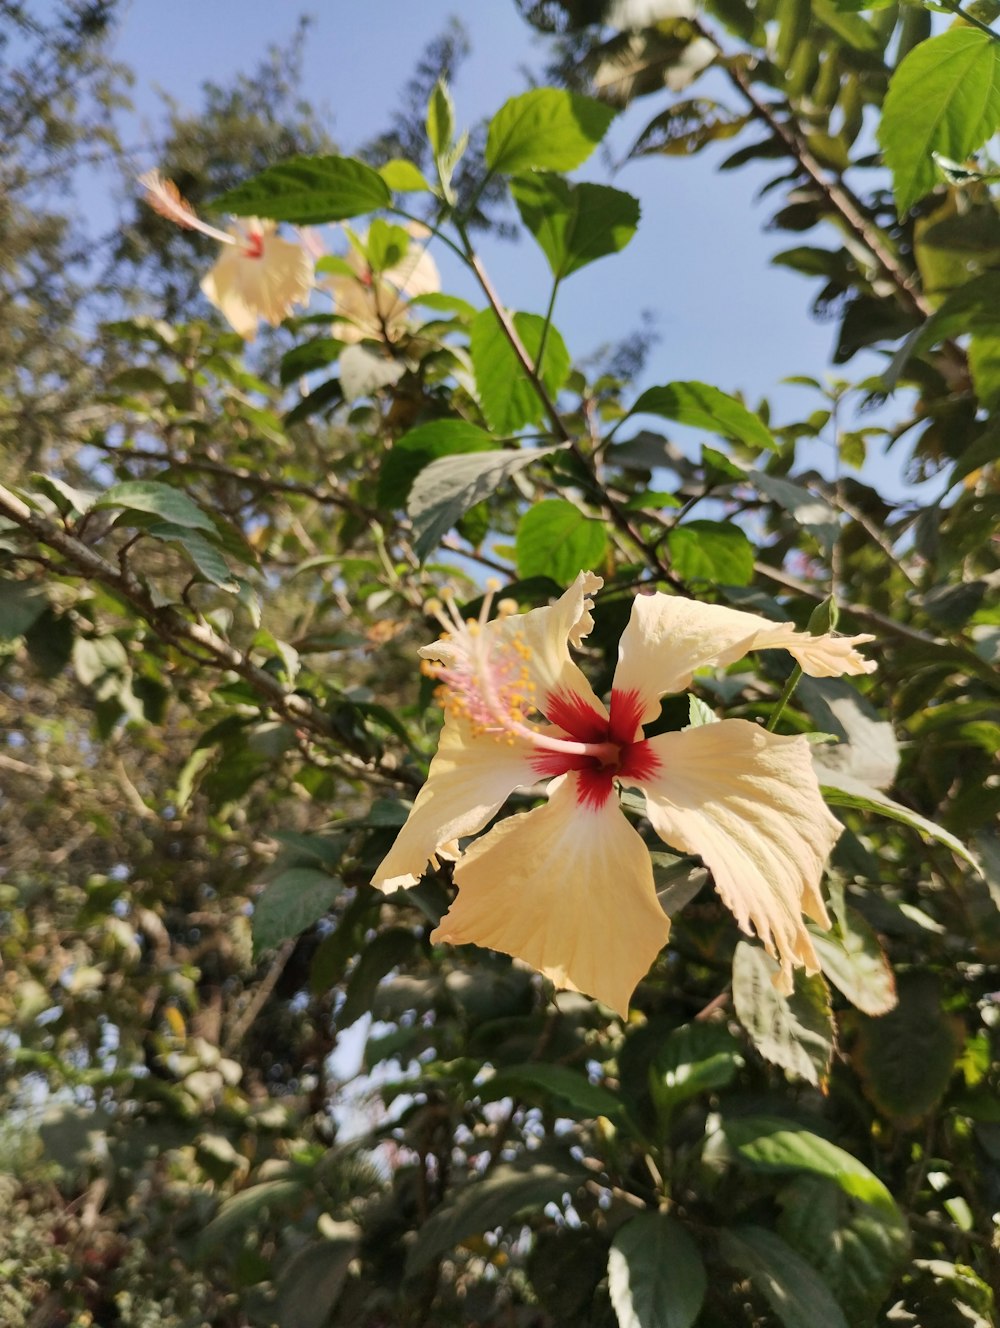 a yellow flower with a red center on a tree